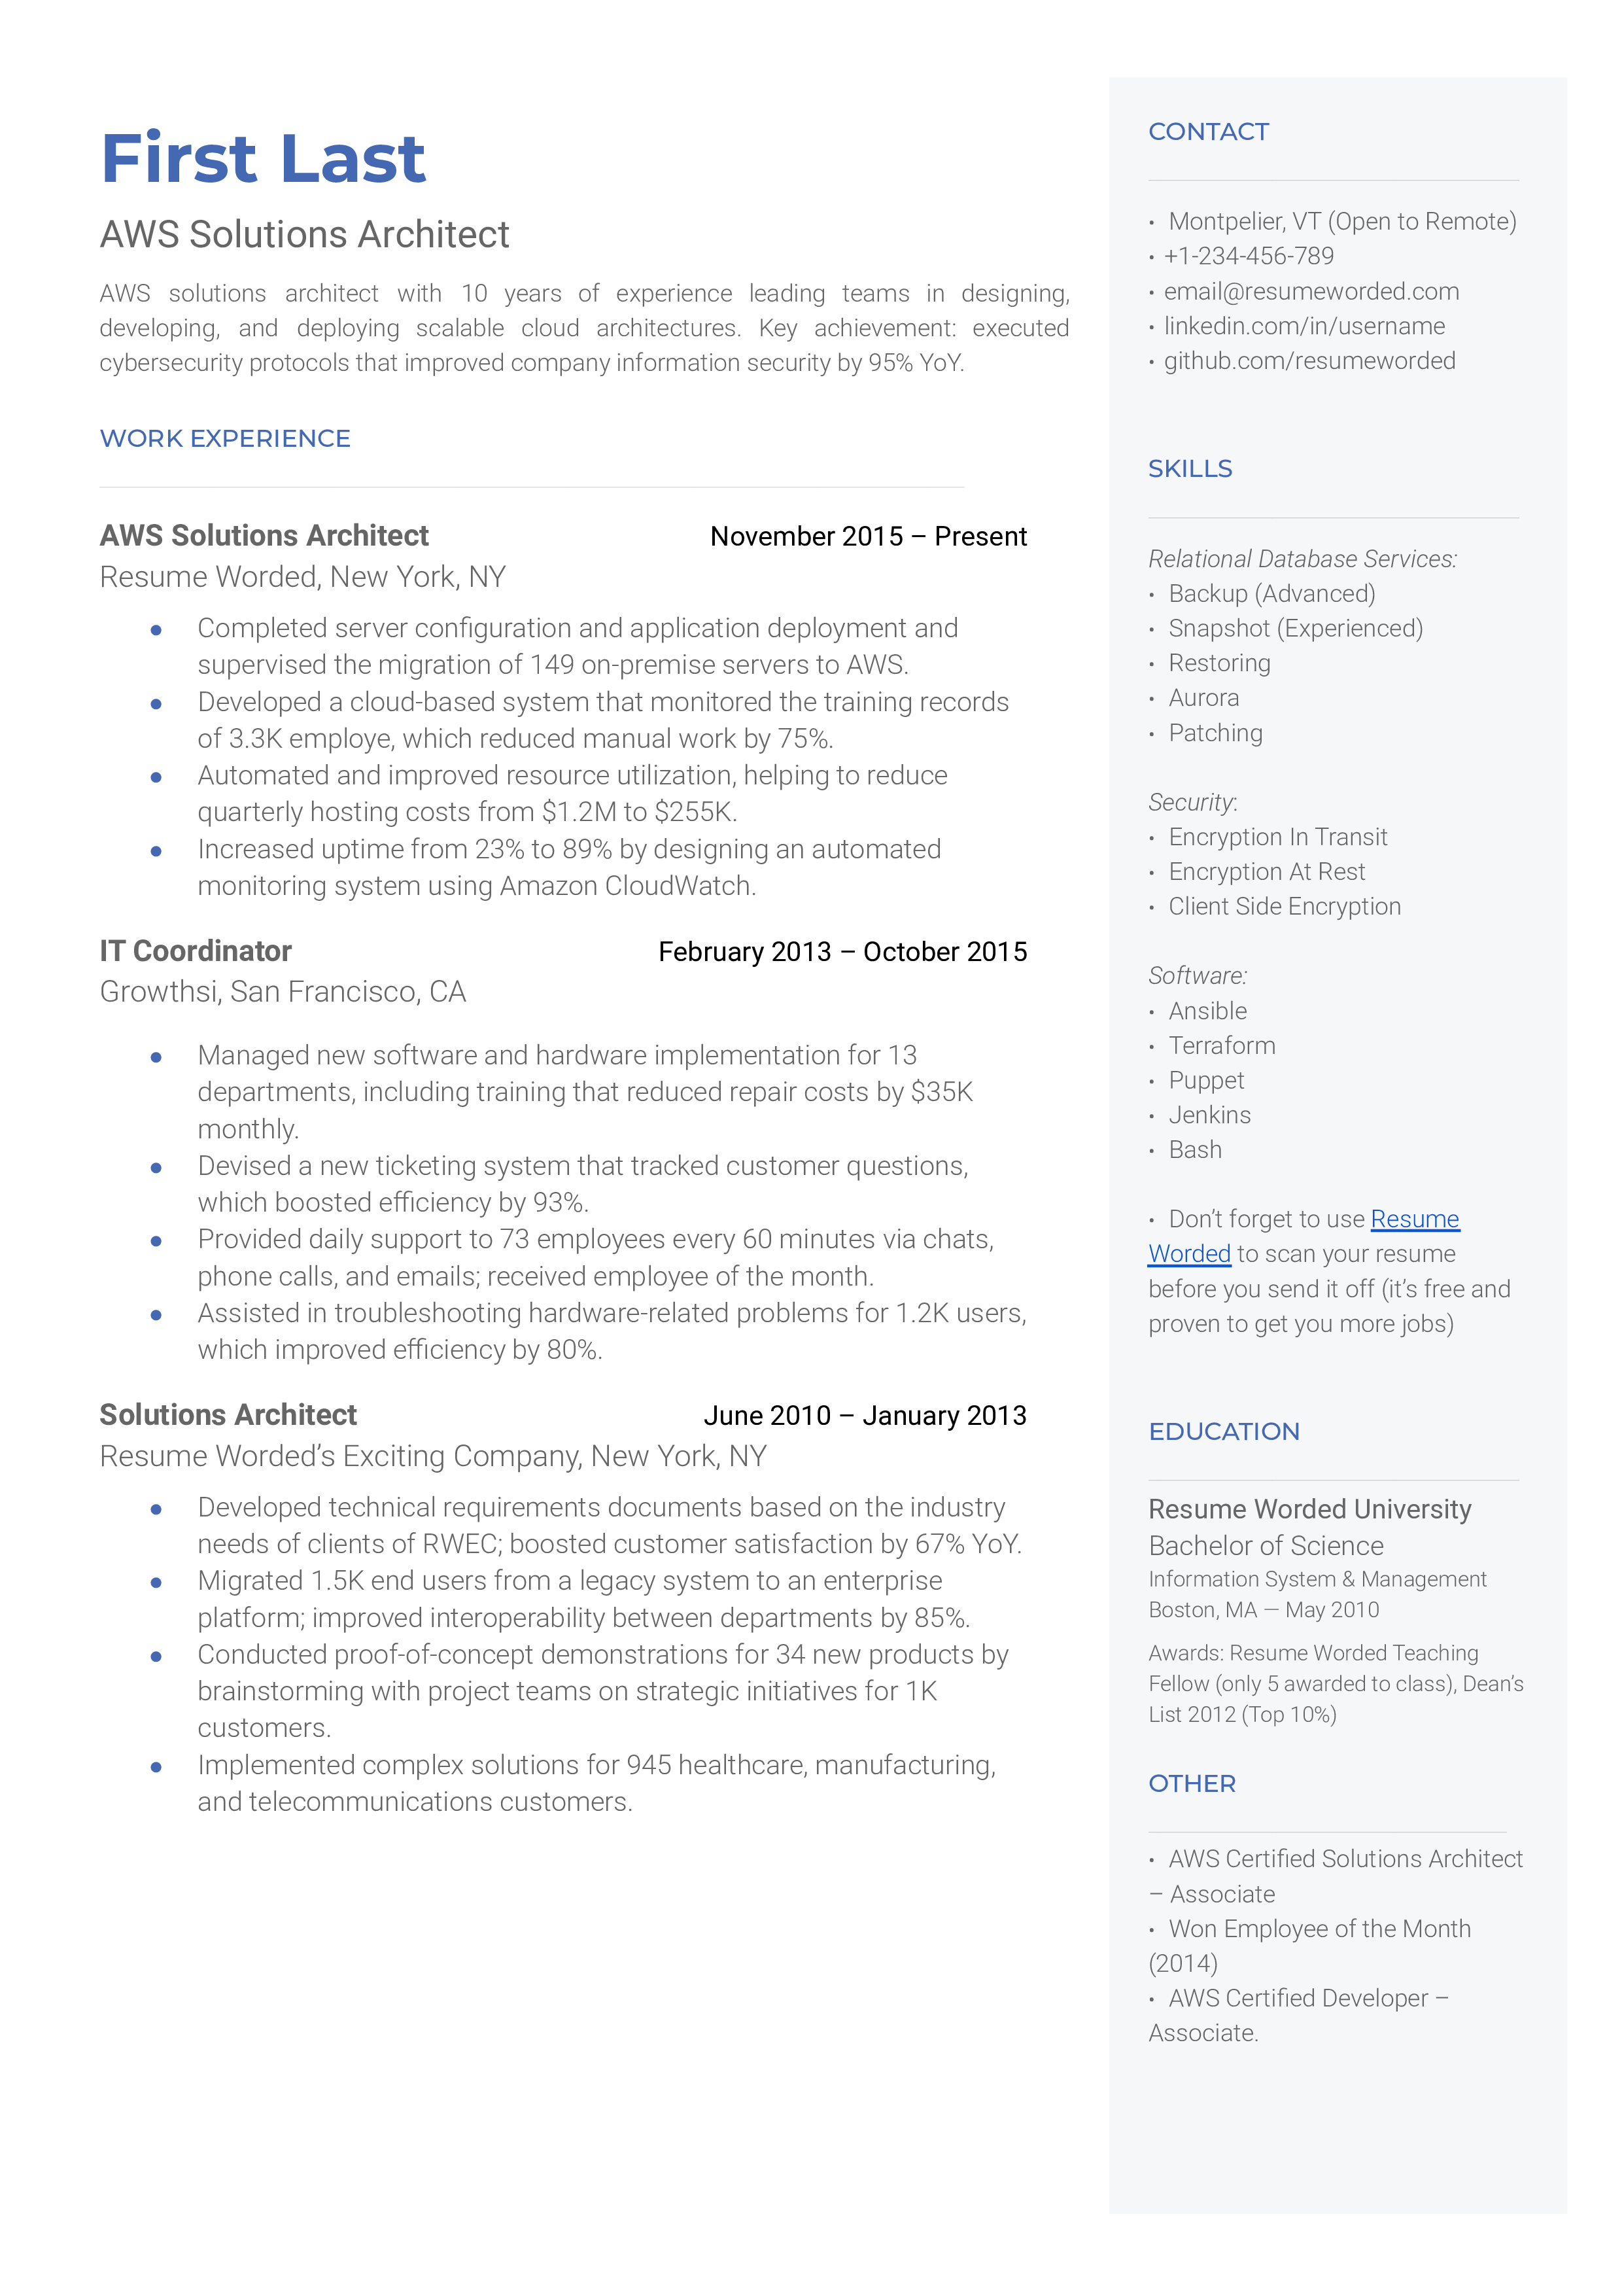 An AWS Solutions Architect resume template that highlights technical skills